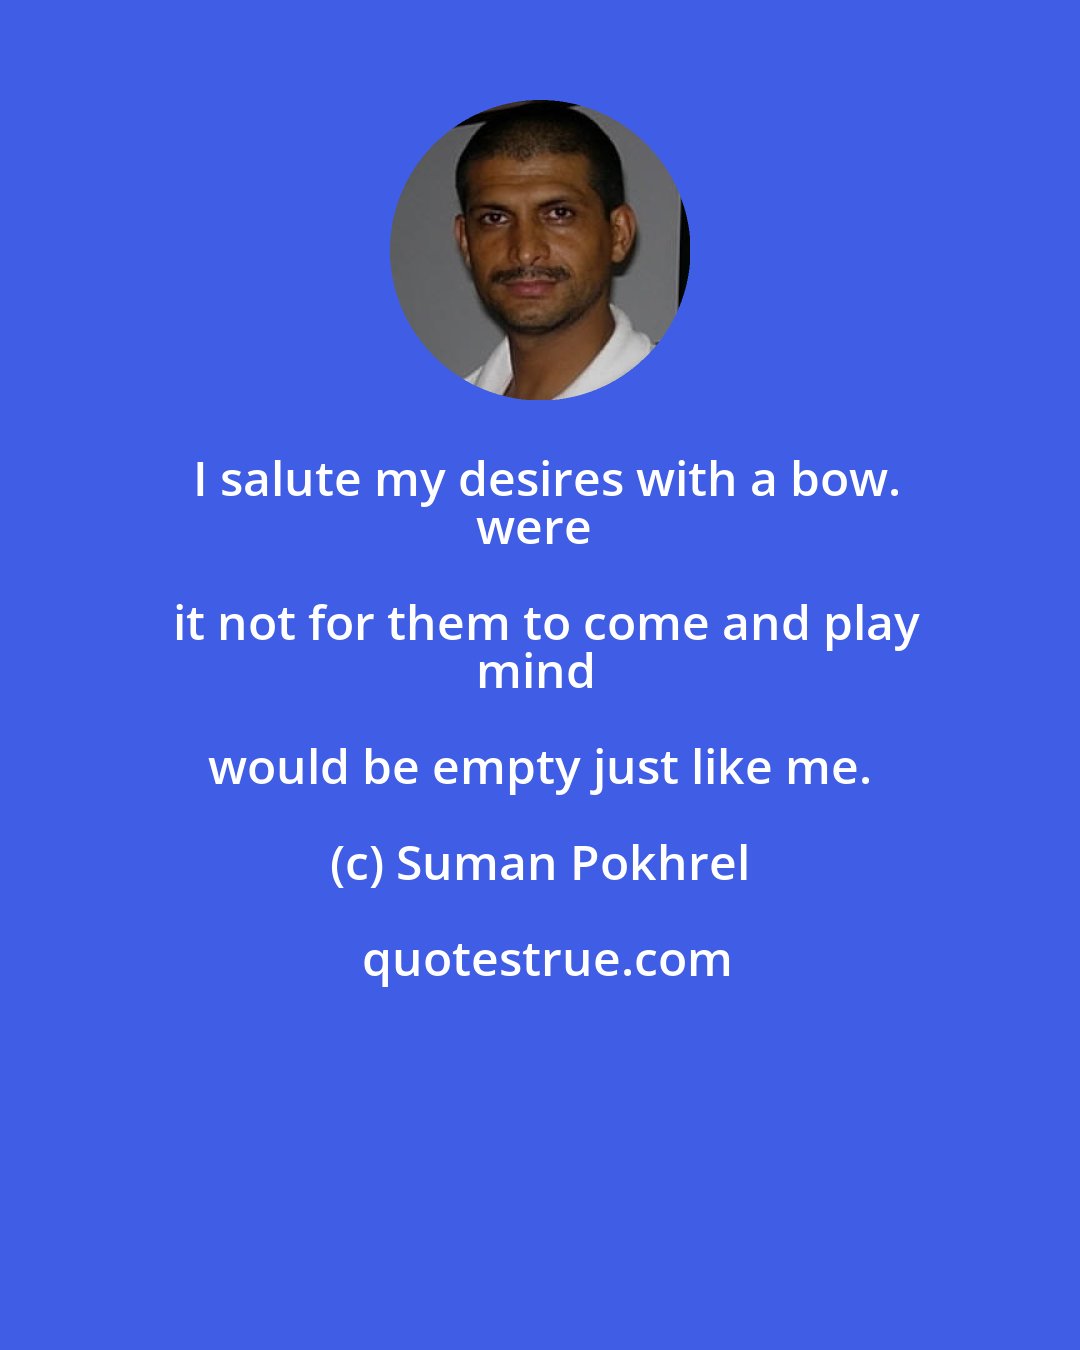 Suman Pokhrel: I salute my desires with a bow.
were it not for them to come and play
mind would be empty just like me.